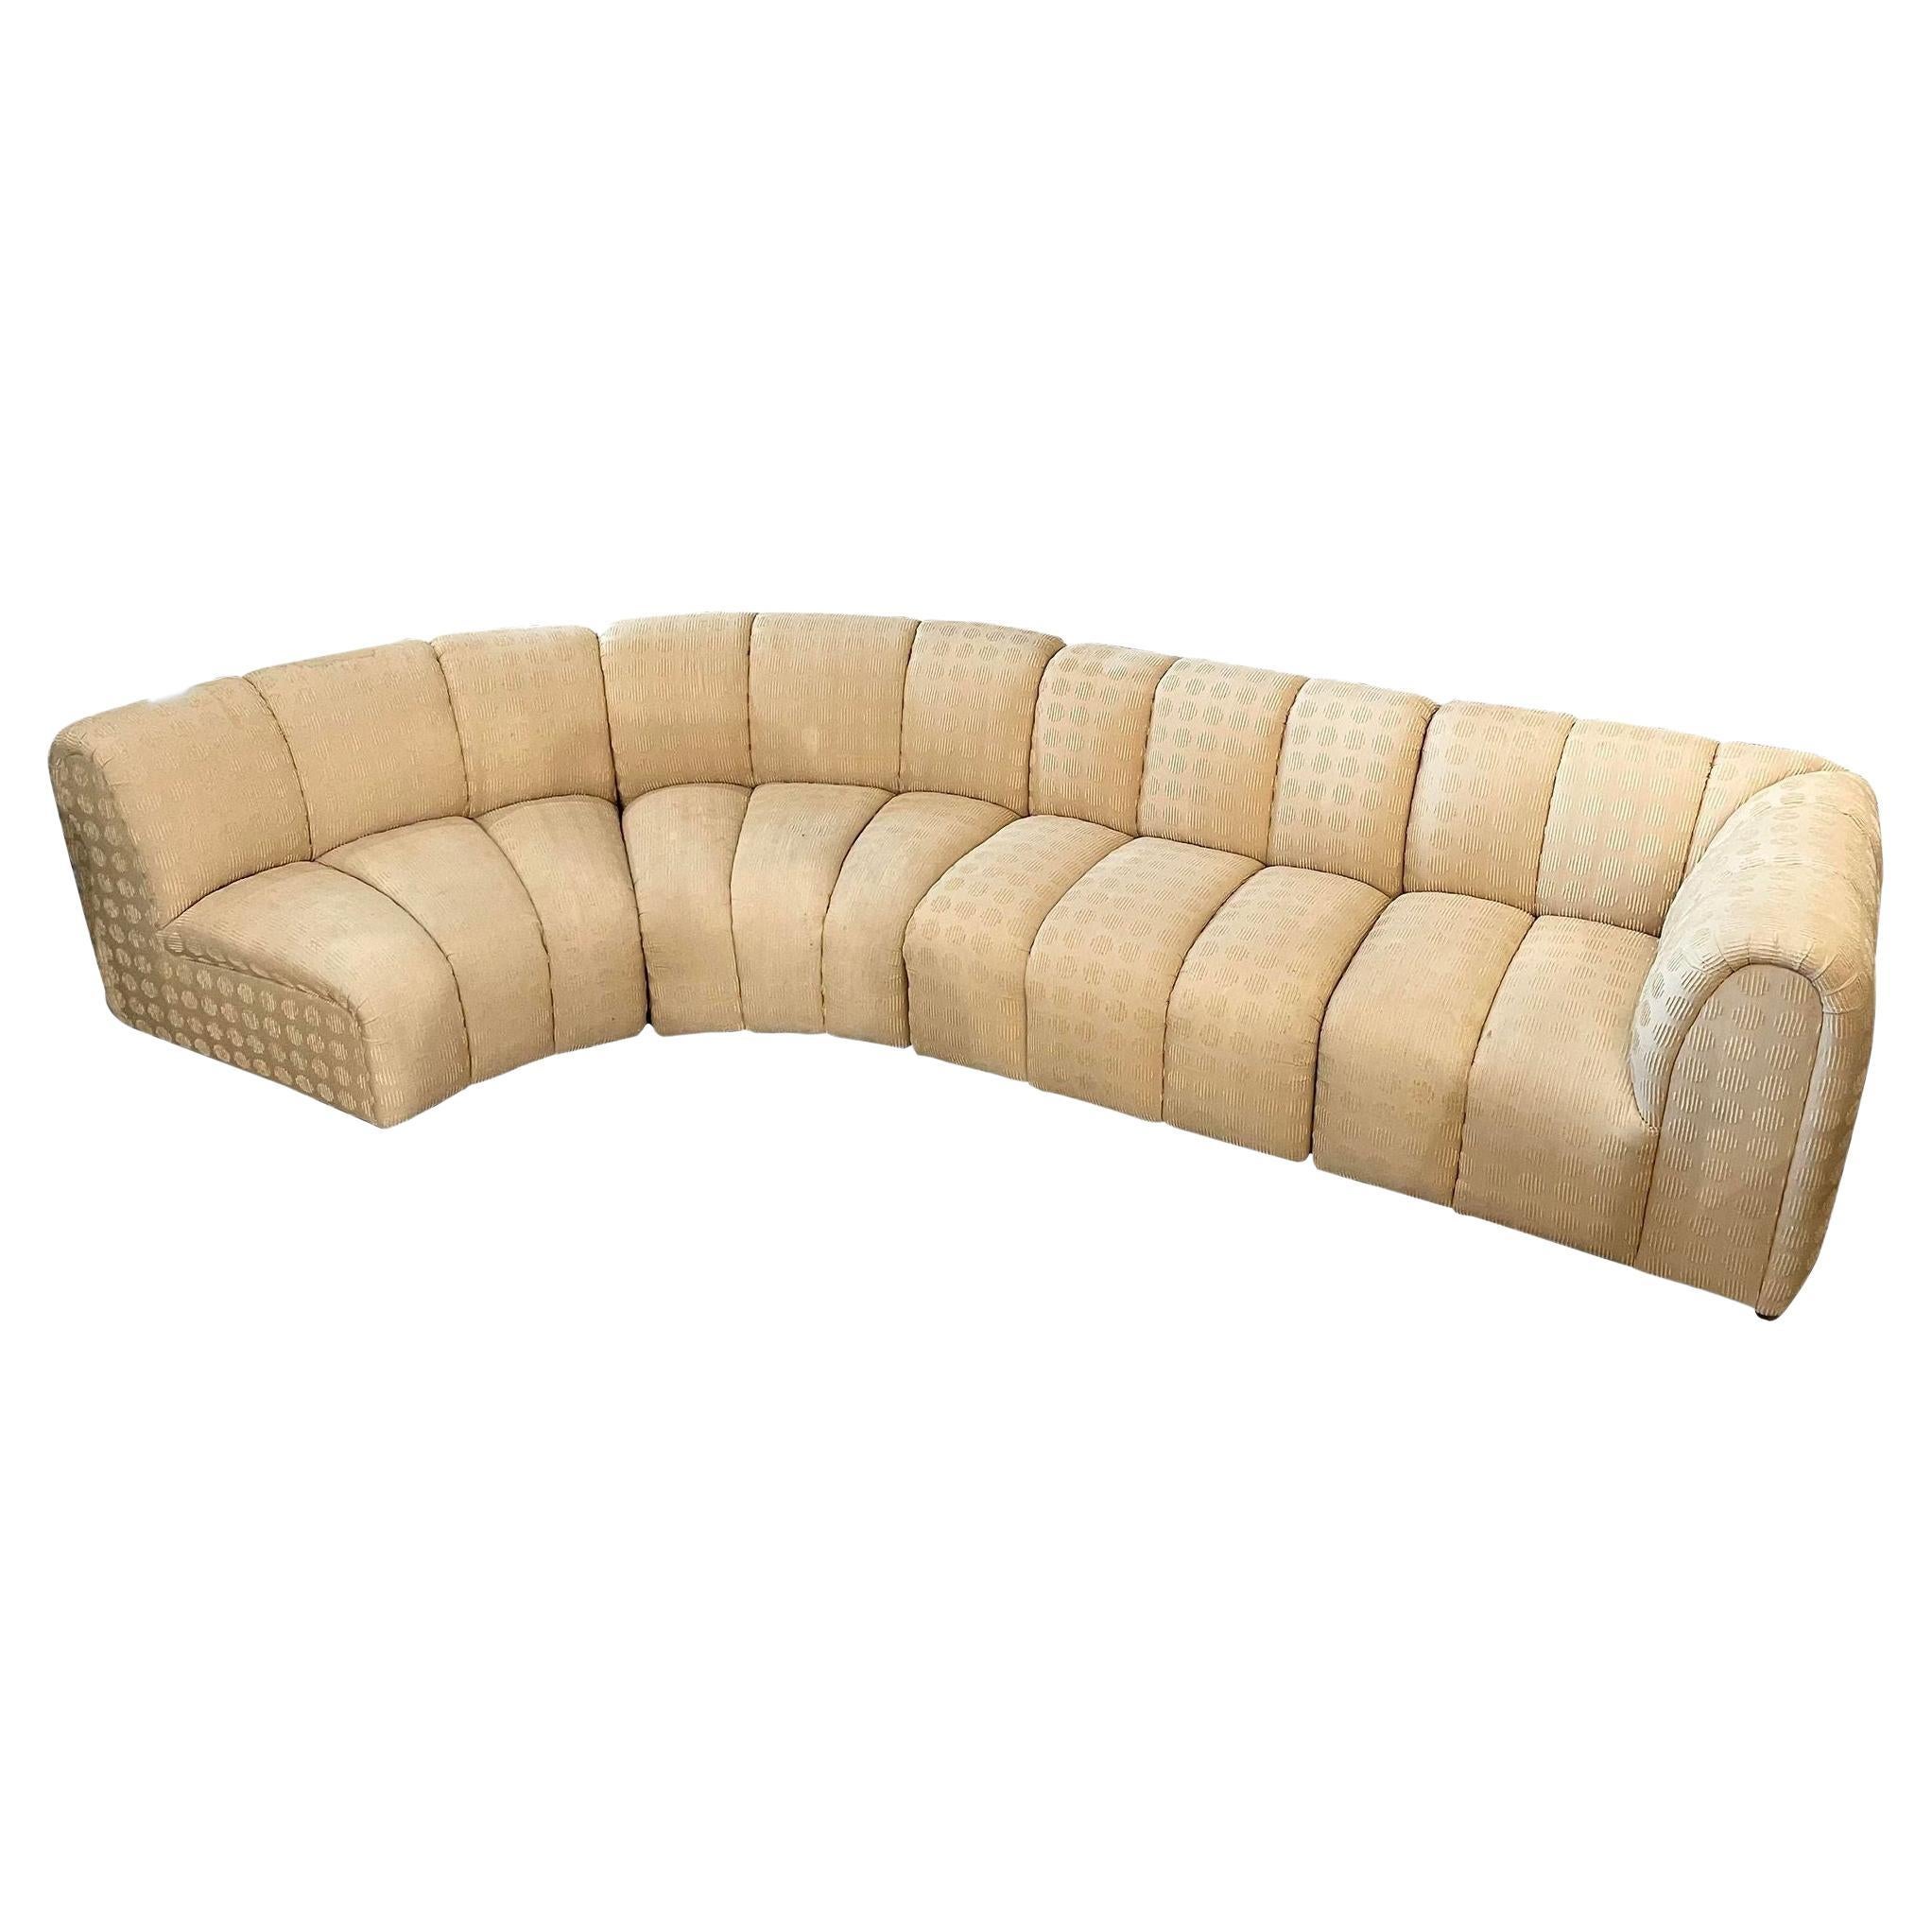 1980s Vintage Channeled Sectional Sofa